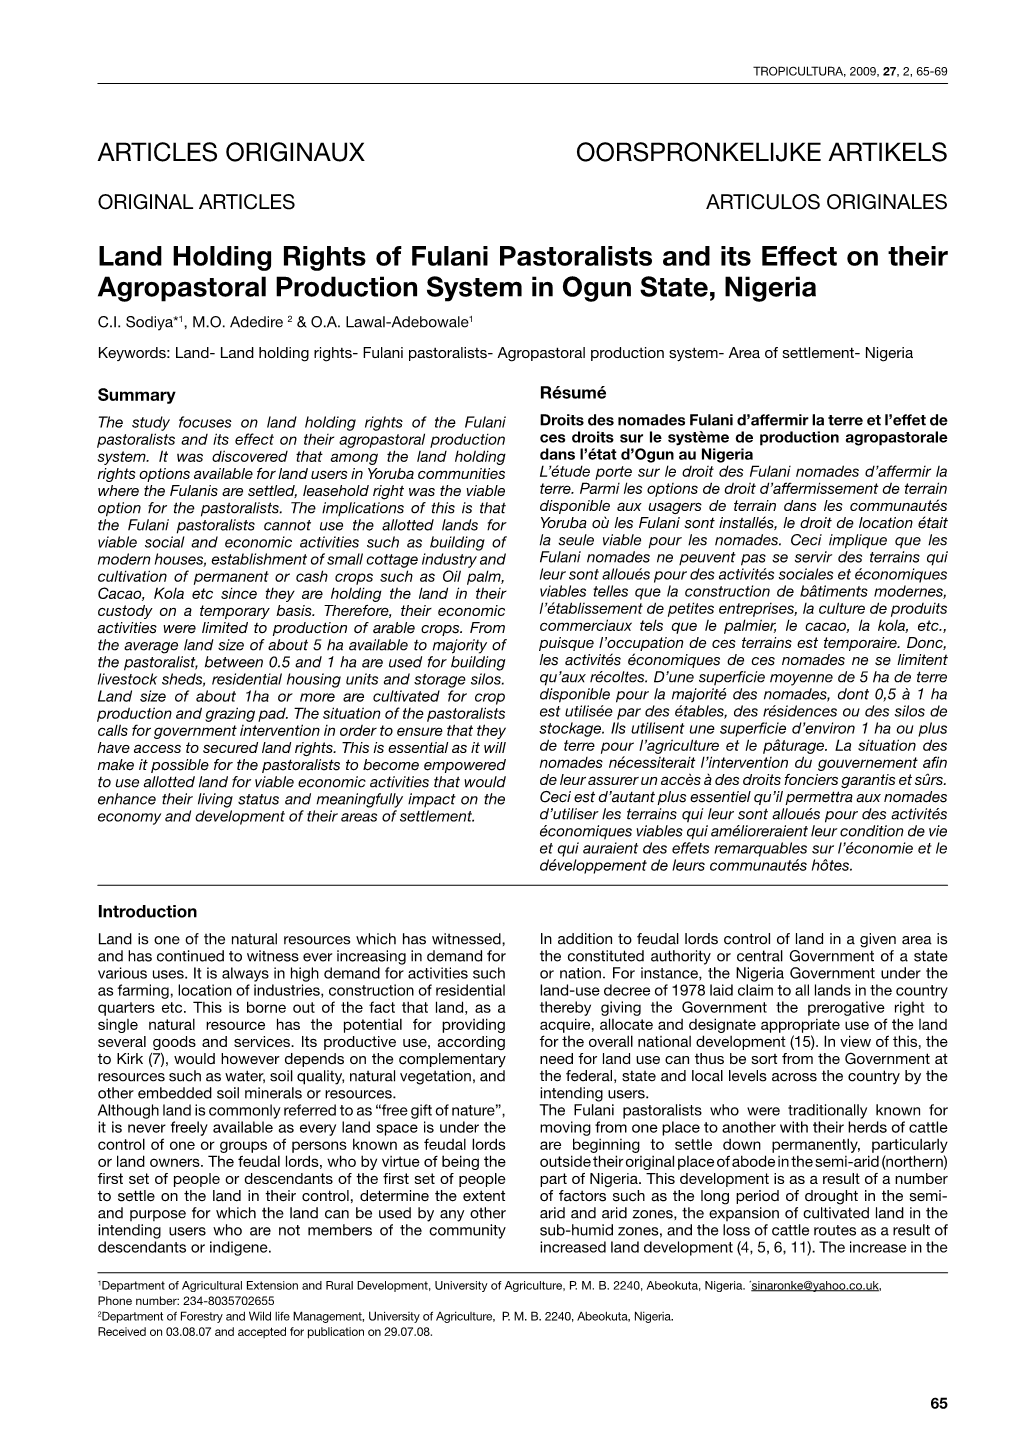 Land Holding Rights of Fulani Pastoralists and Its Effect on Their Agropastoral Production System in Ogun State, Nigeria C.I